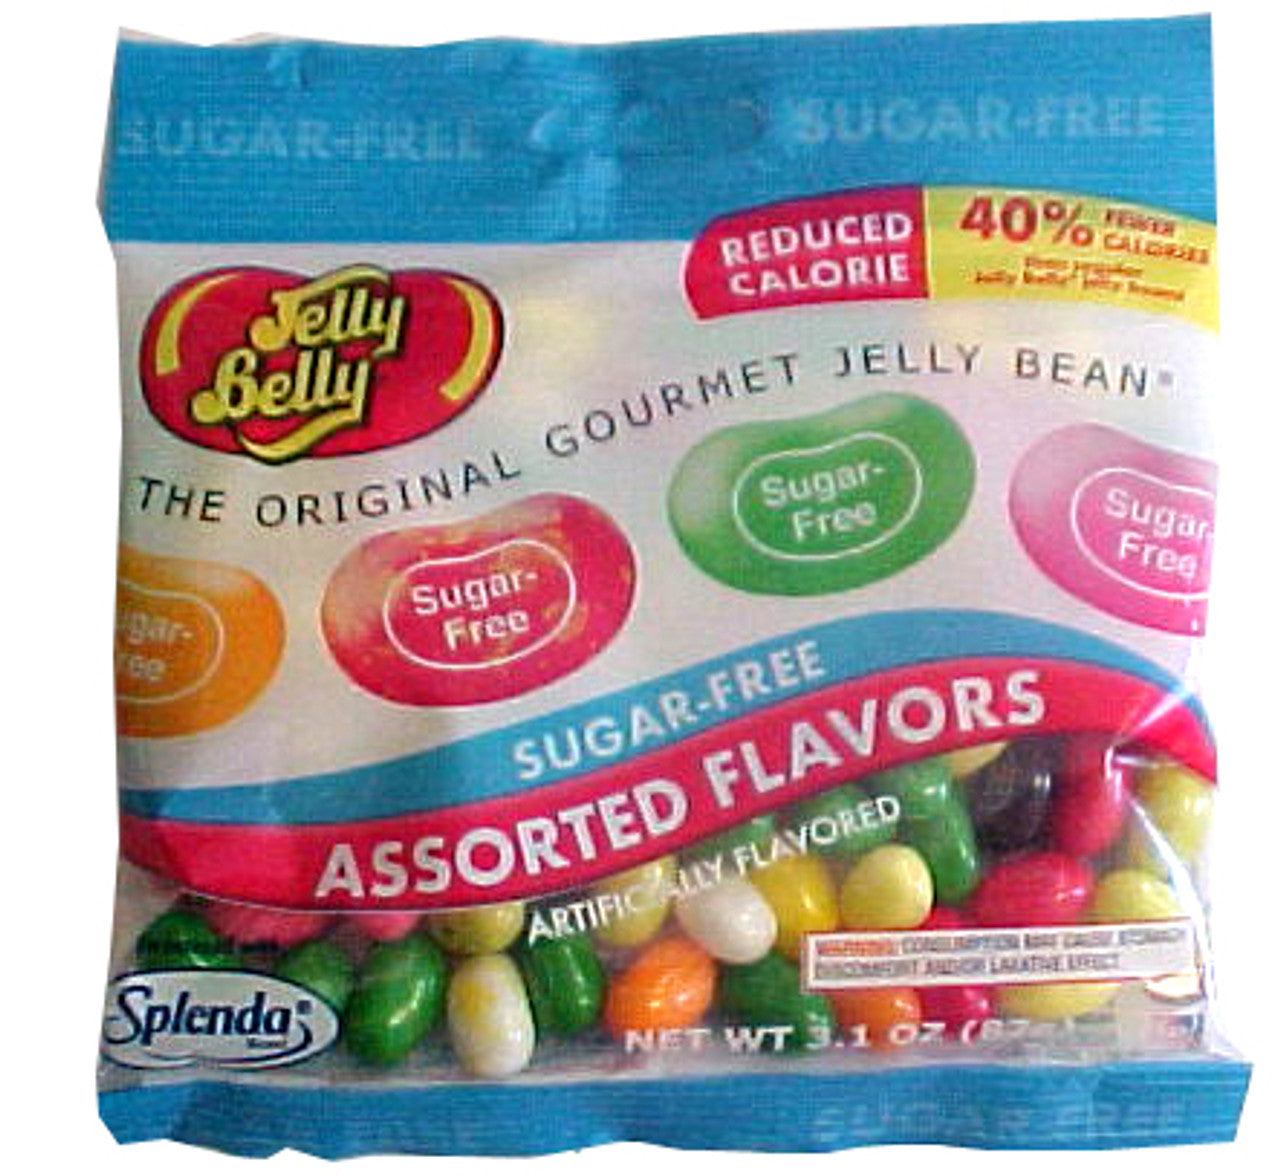 Jelly Belly Sugar Free Jelly Beans 2.8oz Bag